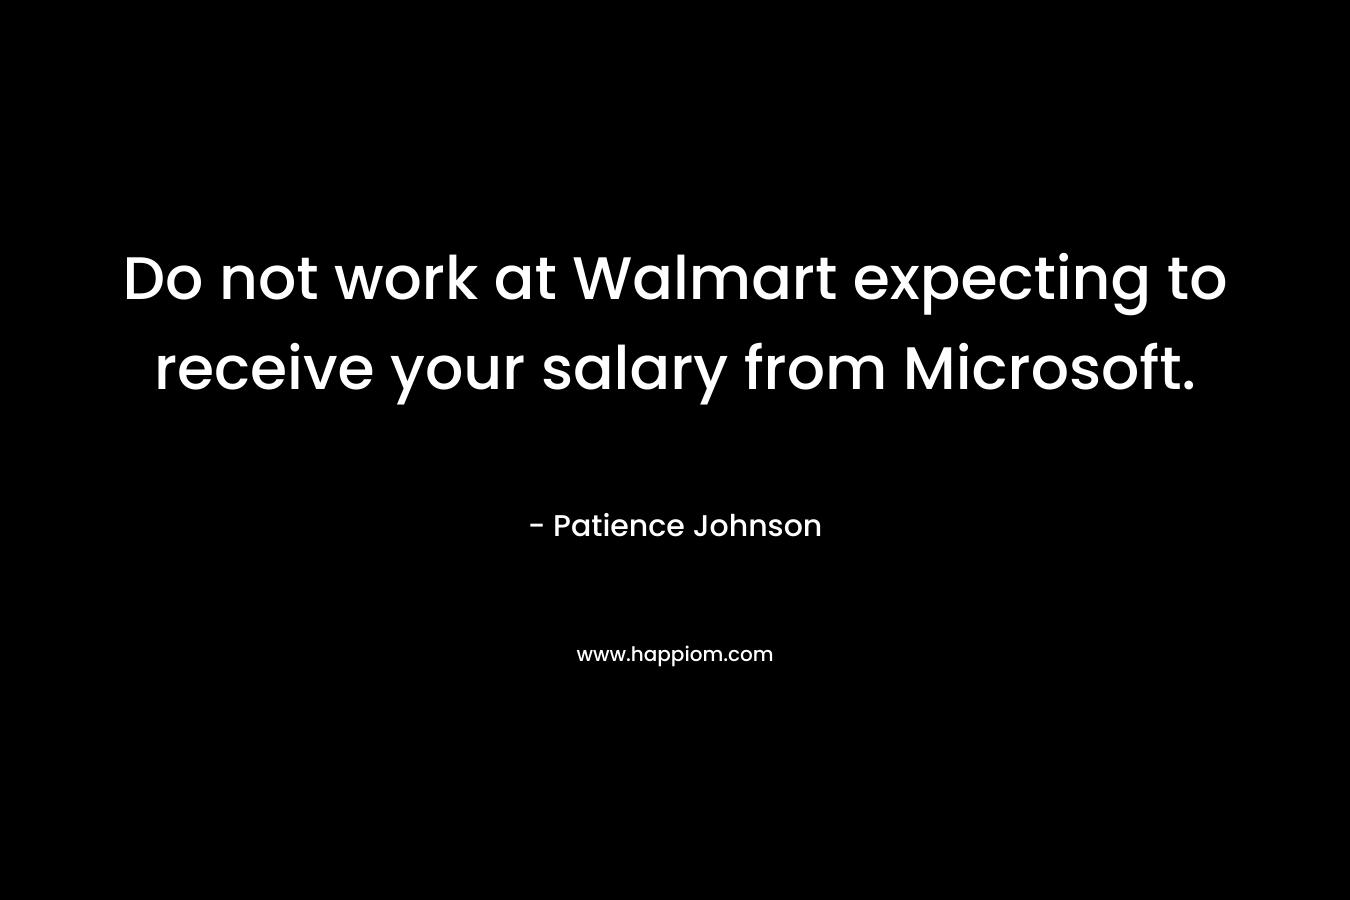 Do not work at Walmart expecting to receive your salary from Microsoft. – Patience Johnson